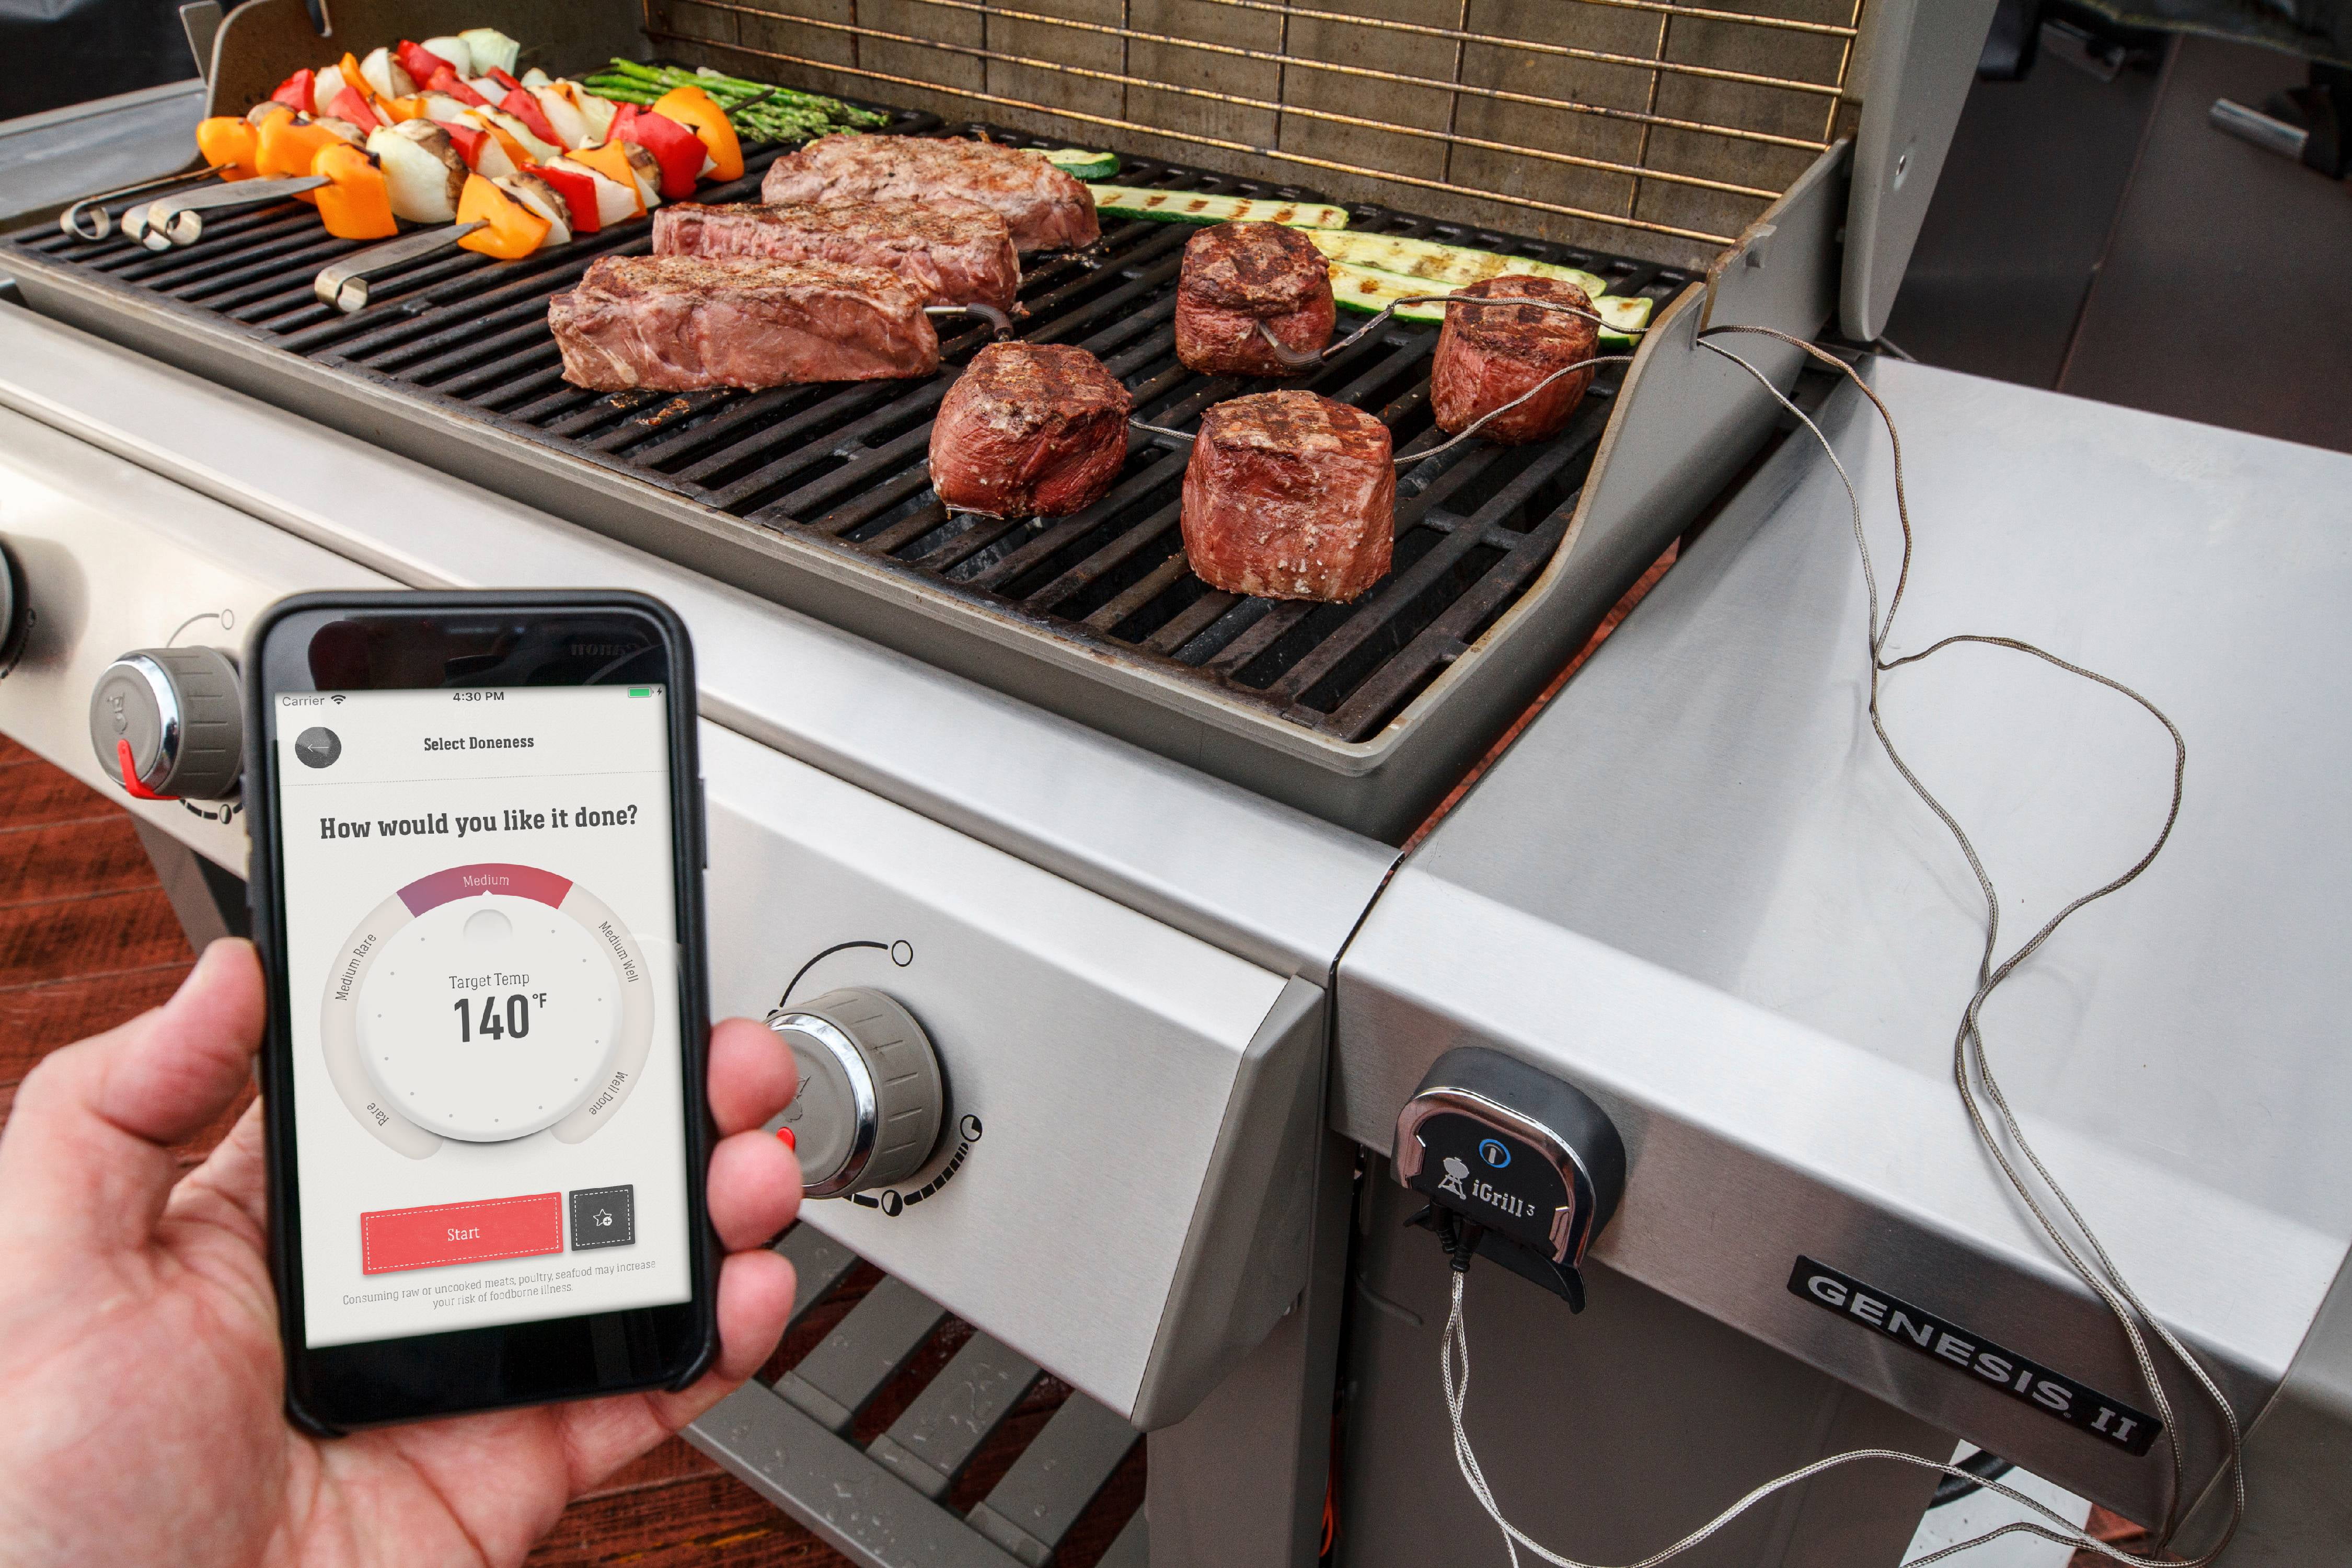 Weber iGrill 3 Bluetooth Connected Digital Smart Thermometer, Black